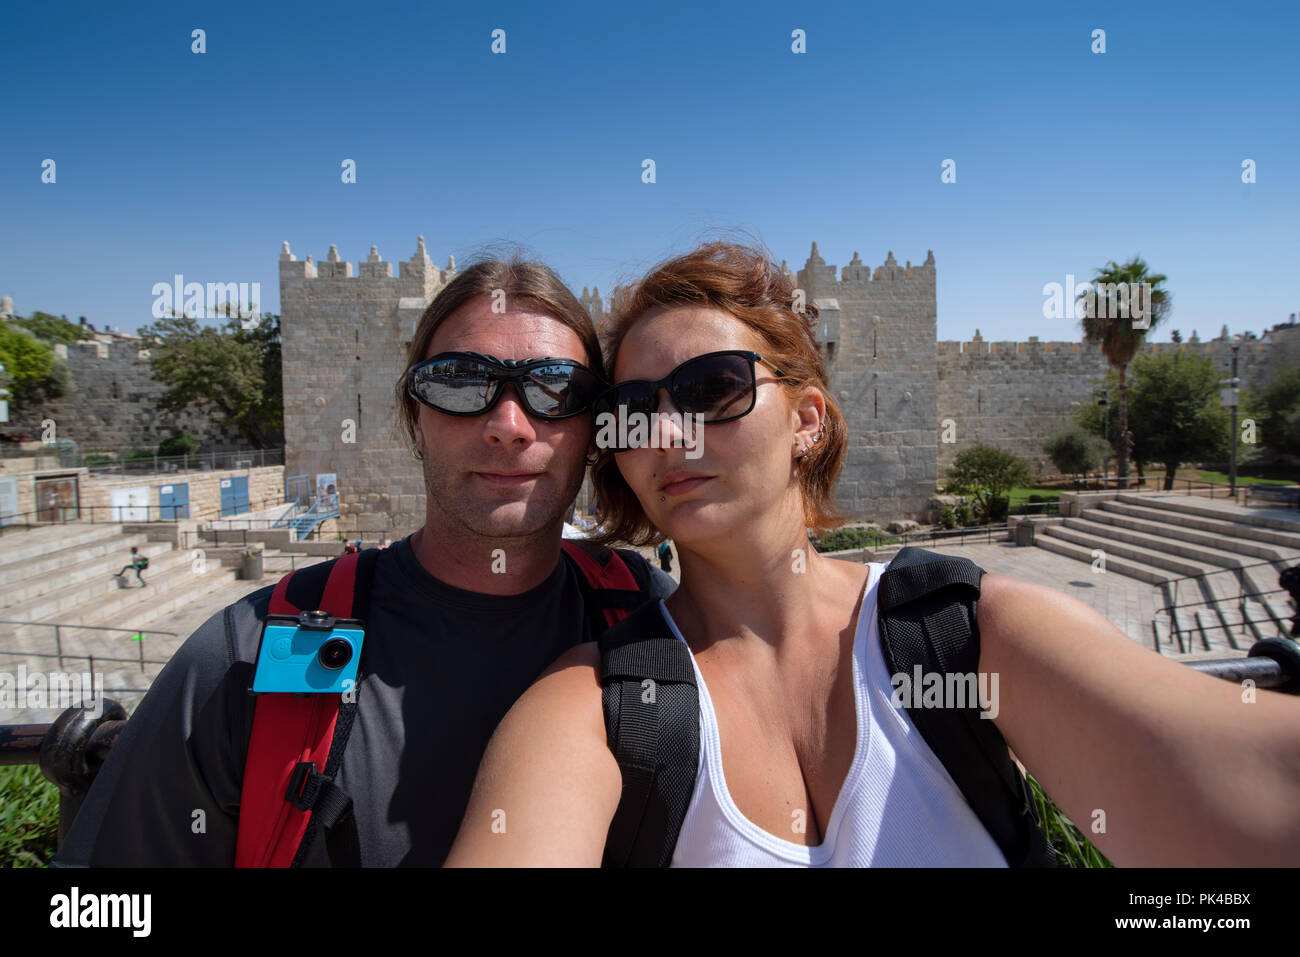 Young couple shot a selfie picture in front of a wall gate in Jerusalem Stock Photo